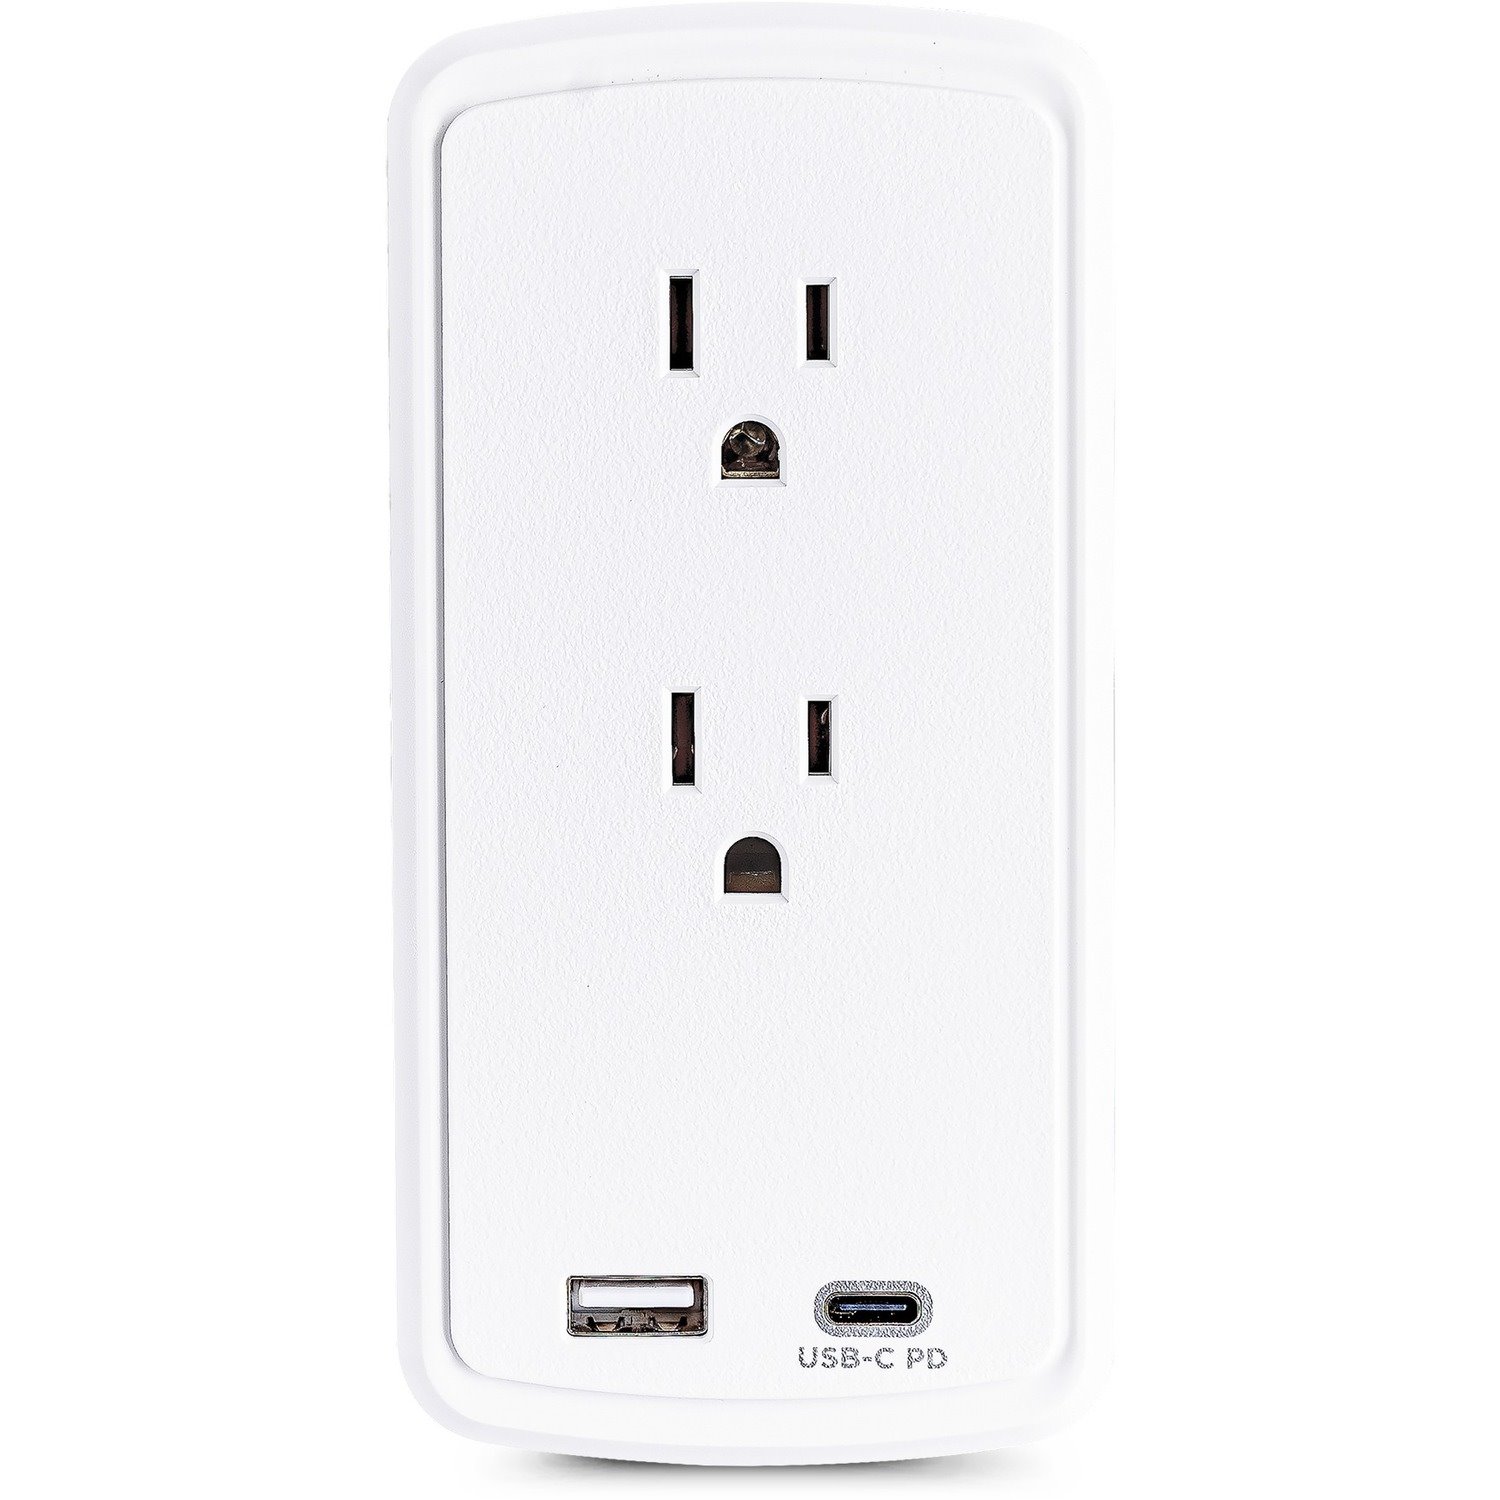 CyberPower Professional P2WUCHD 2-Outlet Surge Suppressor/Protector